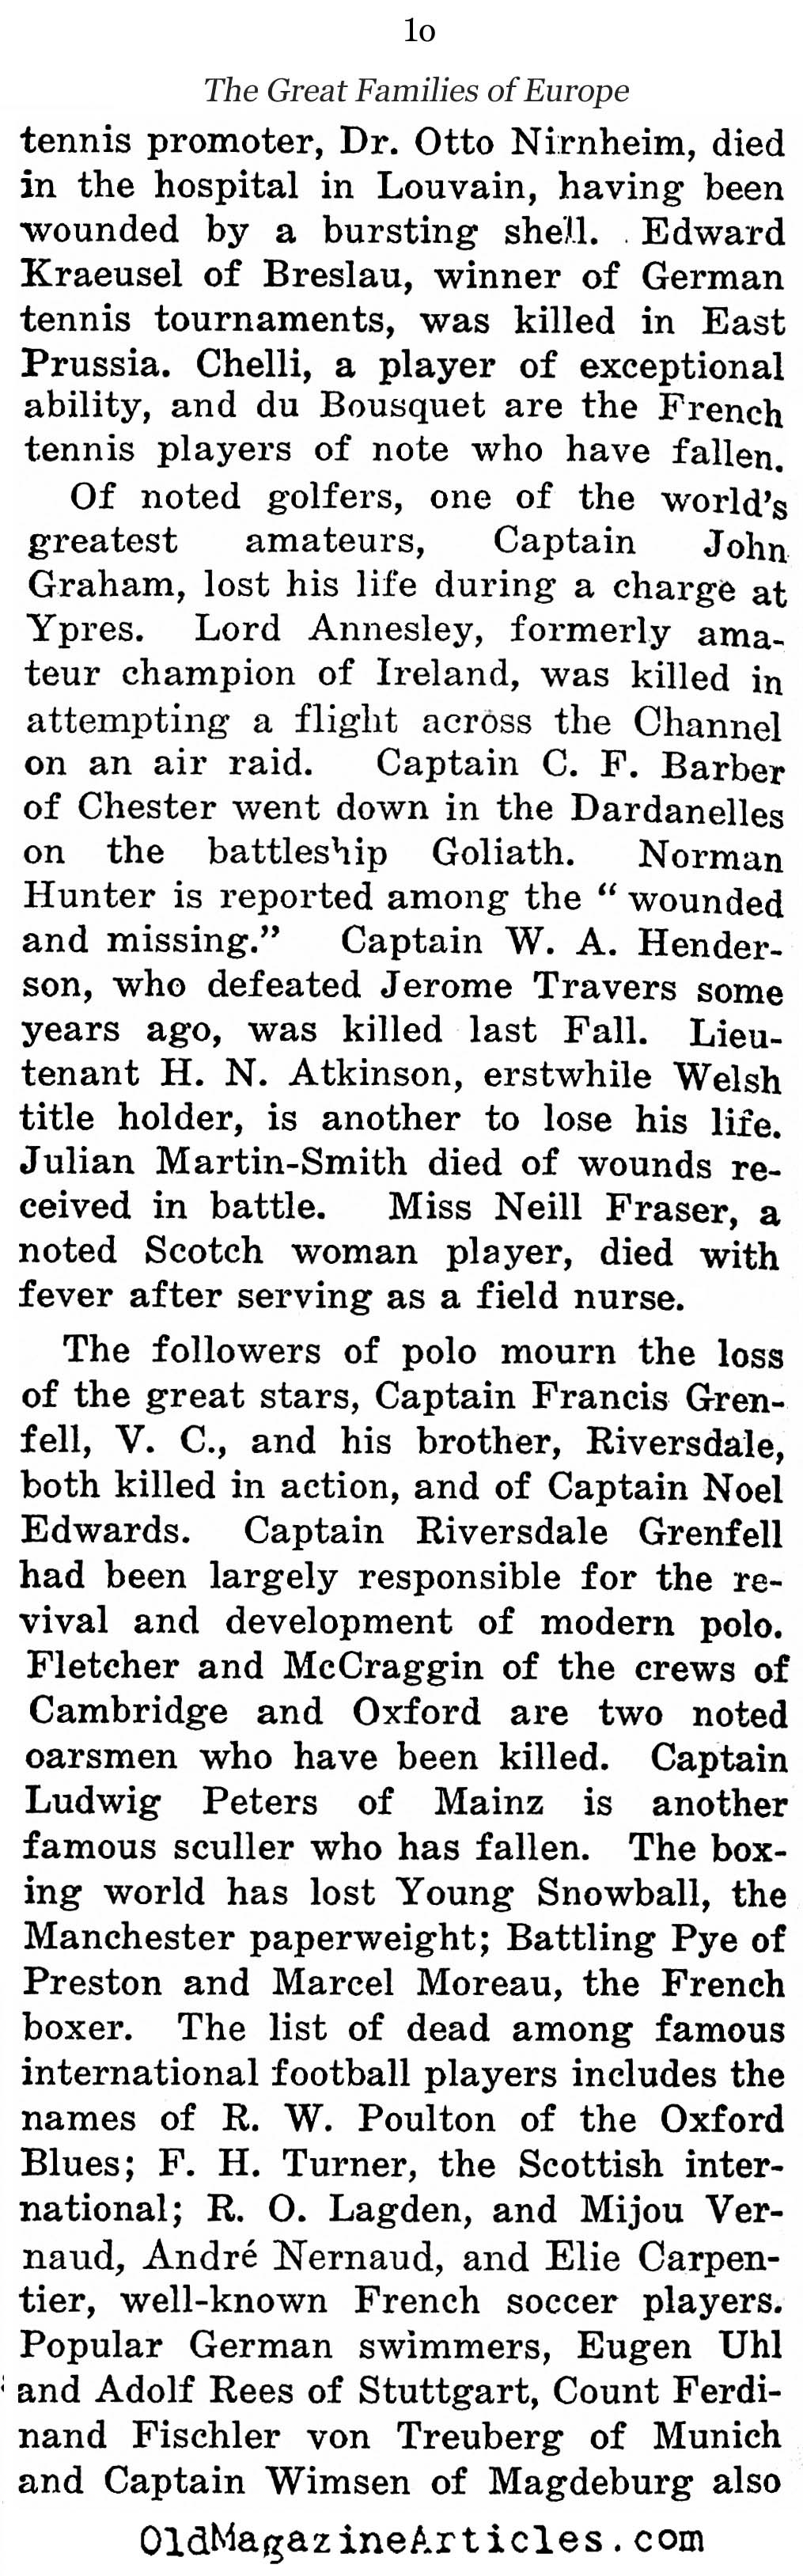 The Slaughter of the Aristocrats (NY Times, 1915)